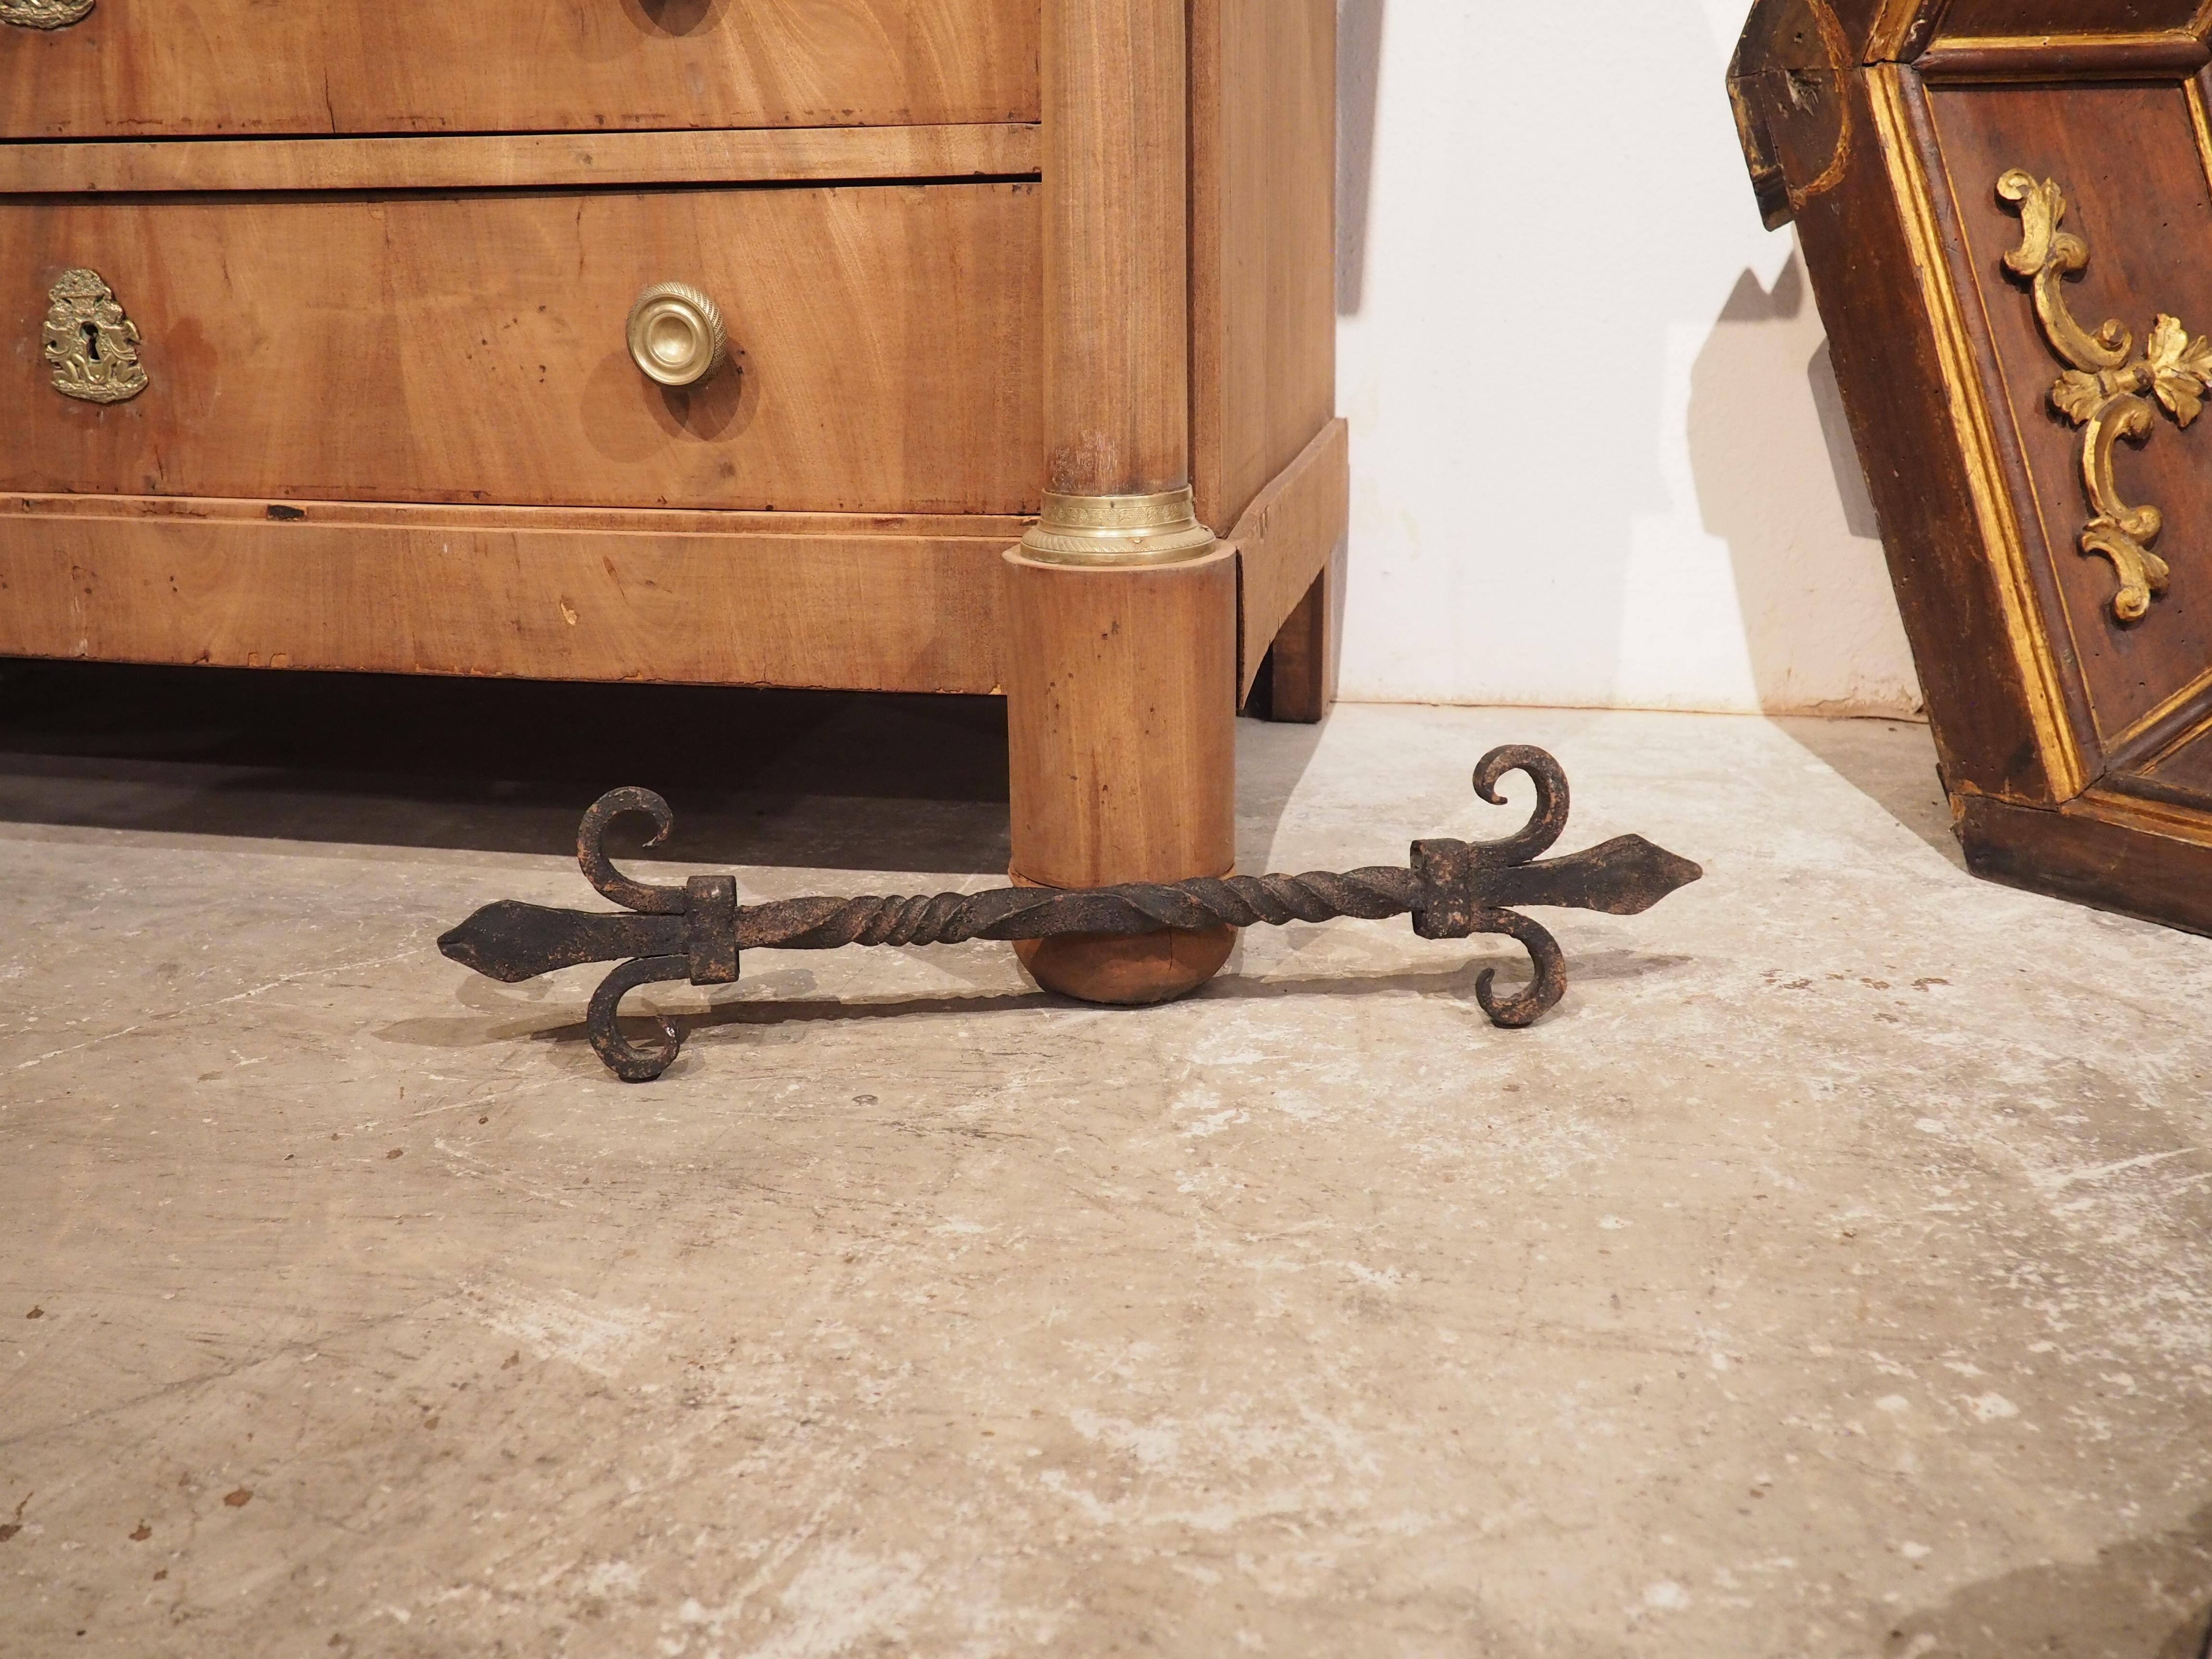 Highlighted by a turned shaft and a pair of fleur de lys terminals, this antique wrought iron architectural was hand-forged in France during the 1800’s. The fleur de lys are attached to the end of the center element by a rectangular brace, which was